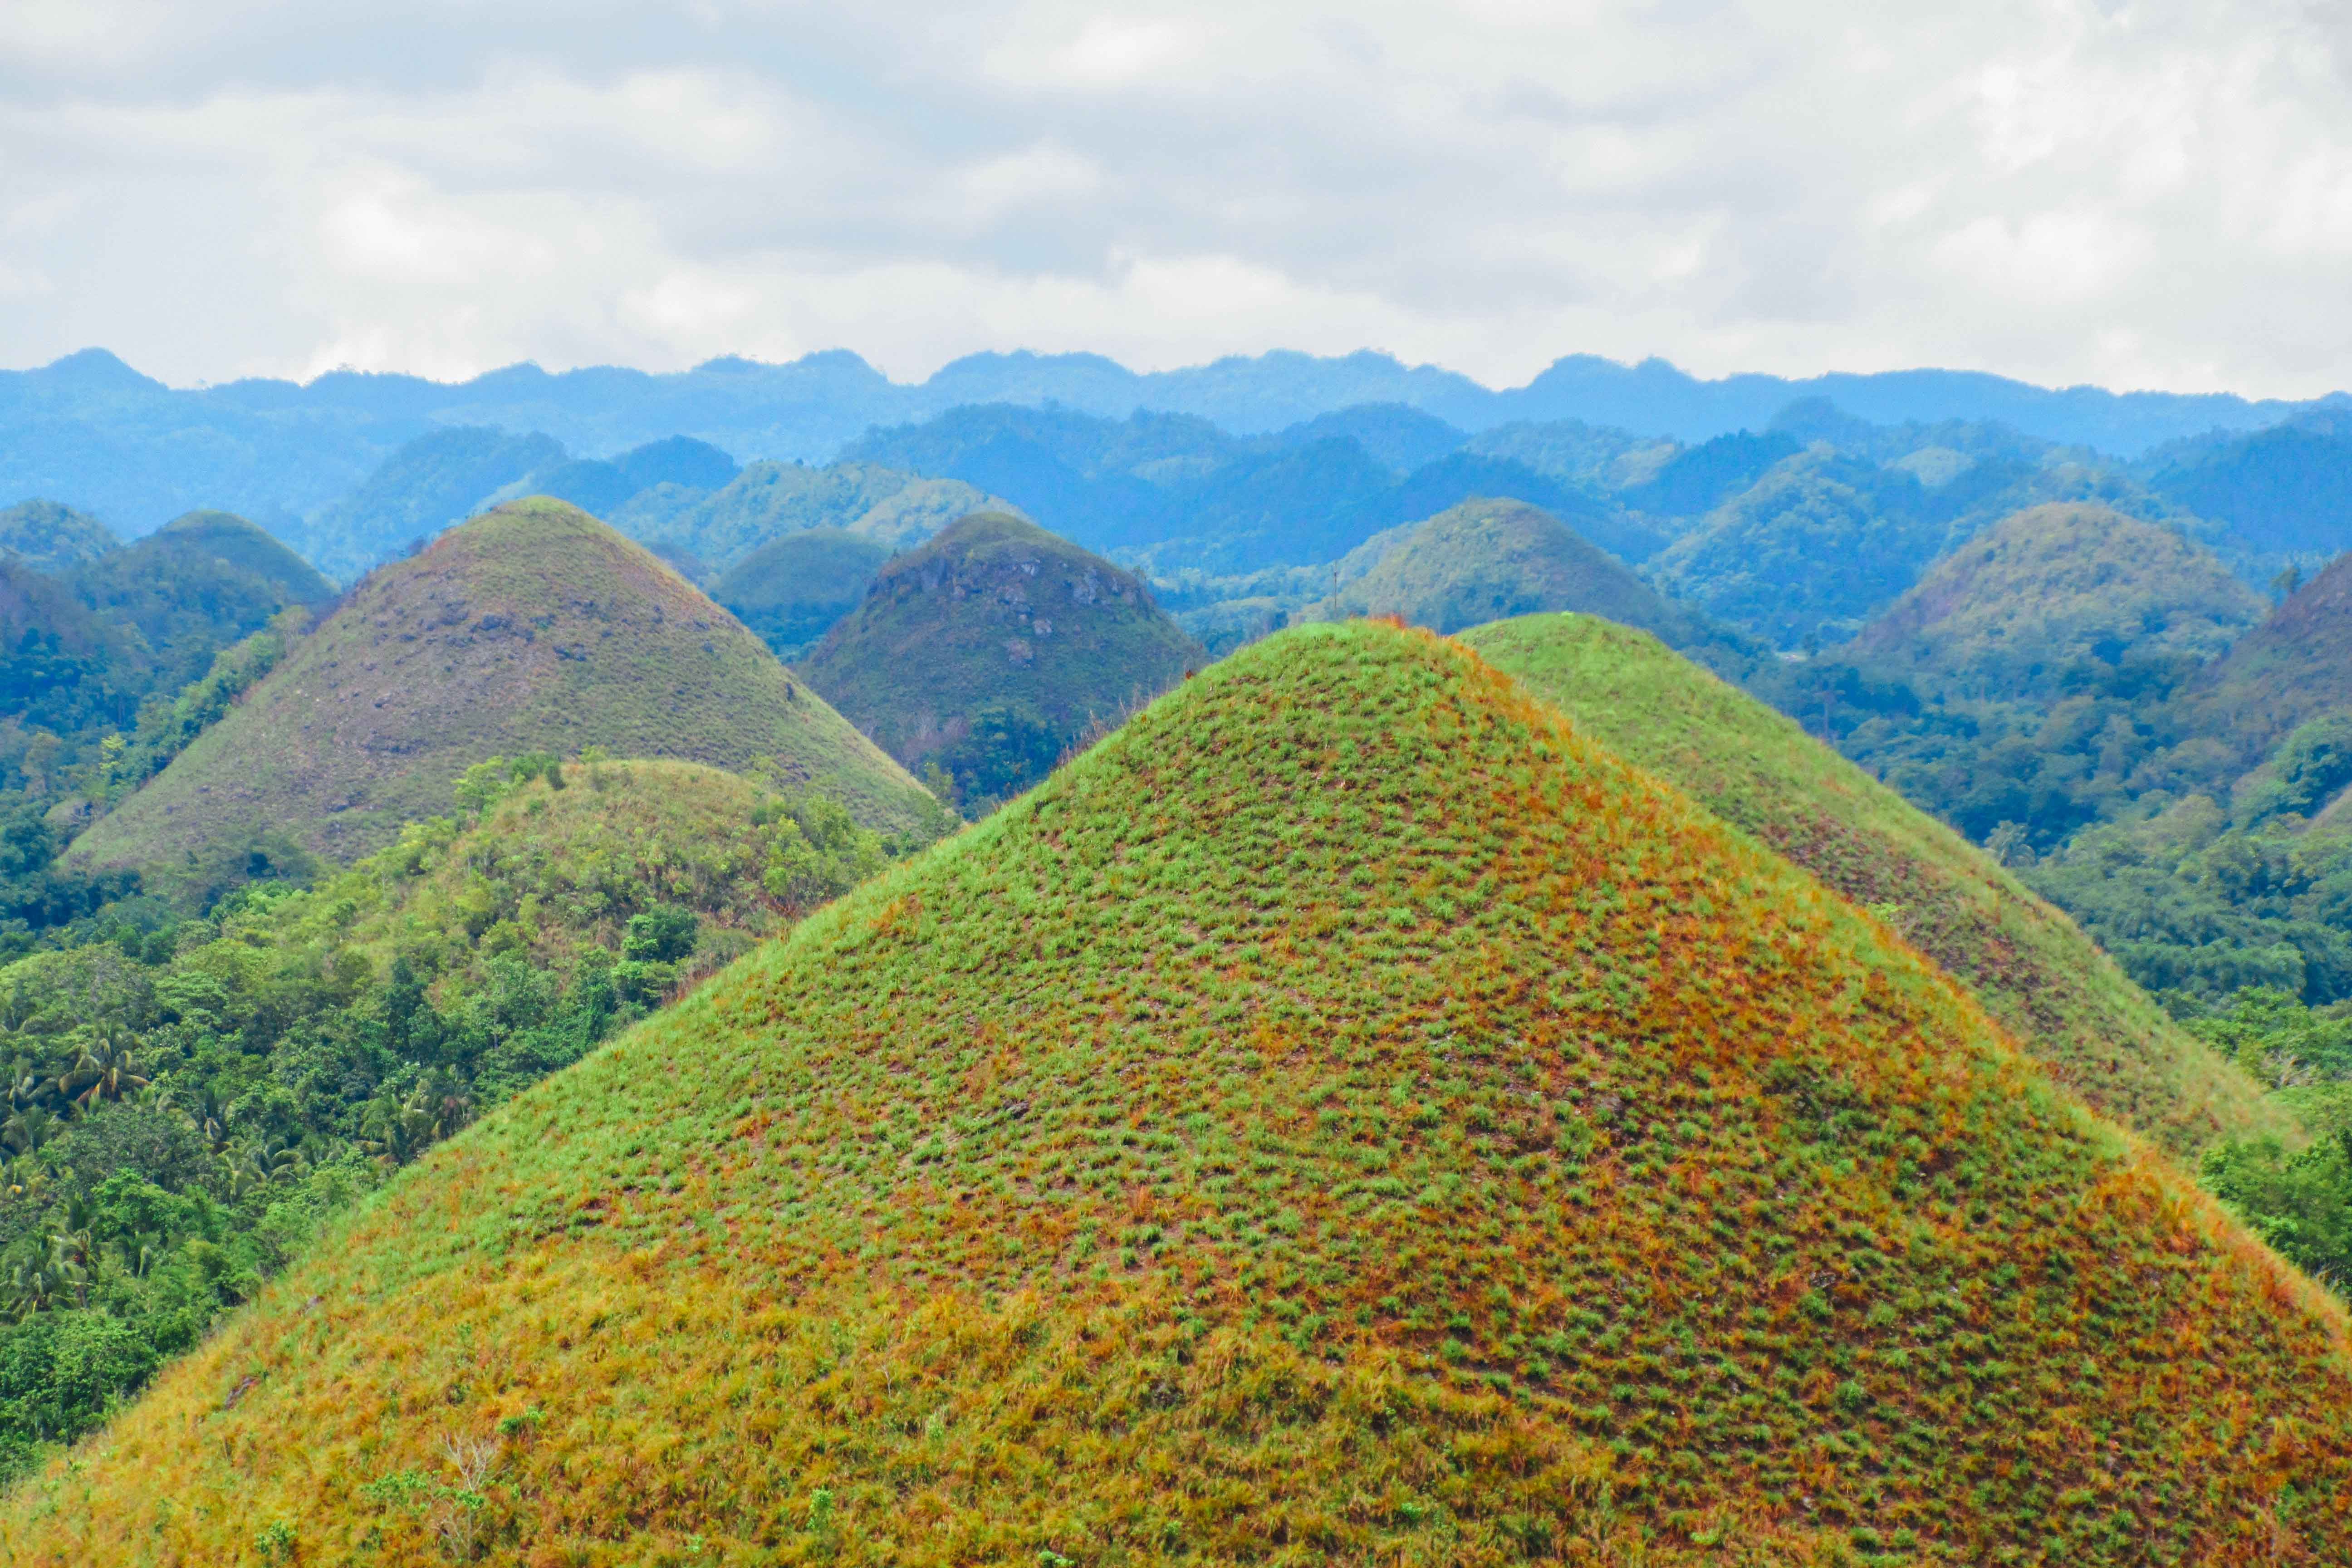 AS FAR AS THE EYES COULD SEE. A visit to Bohol would be incomplete without a trip to the Chocolate Hills. Photo by Josh Berida 